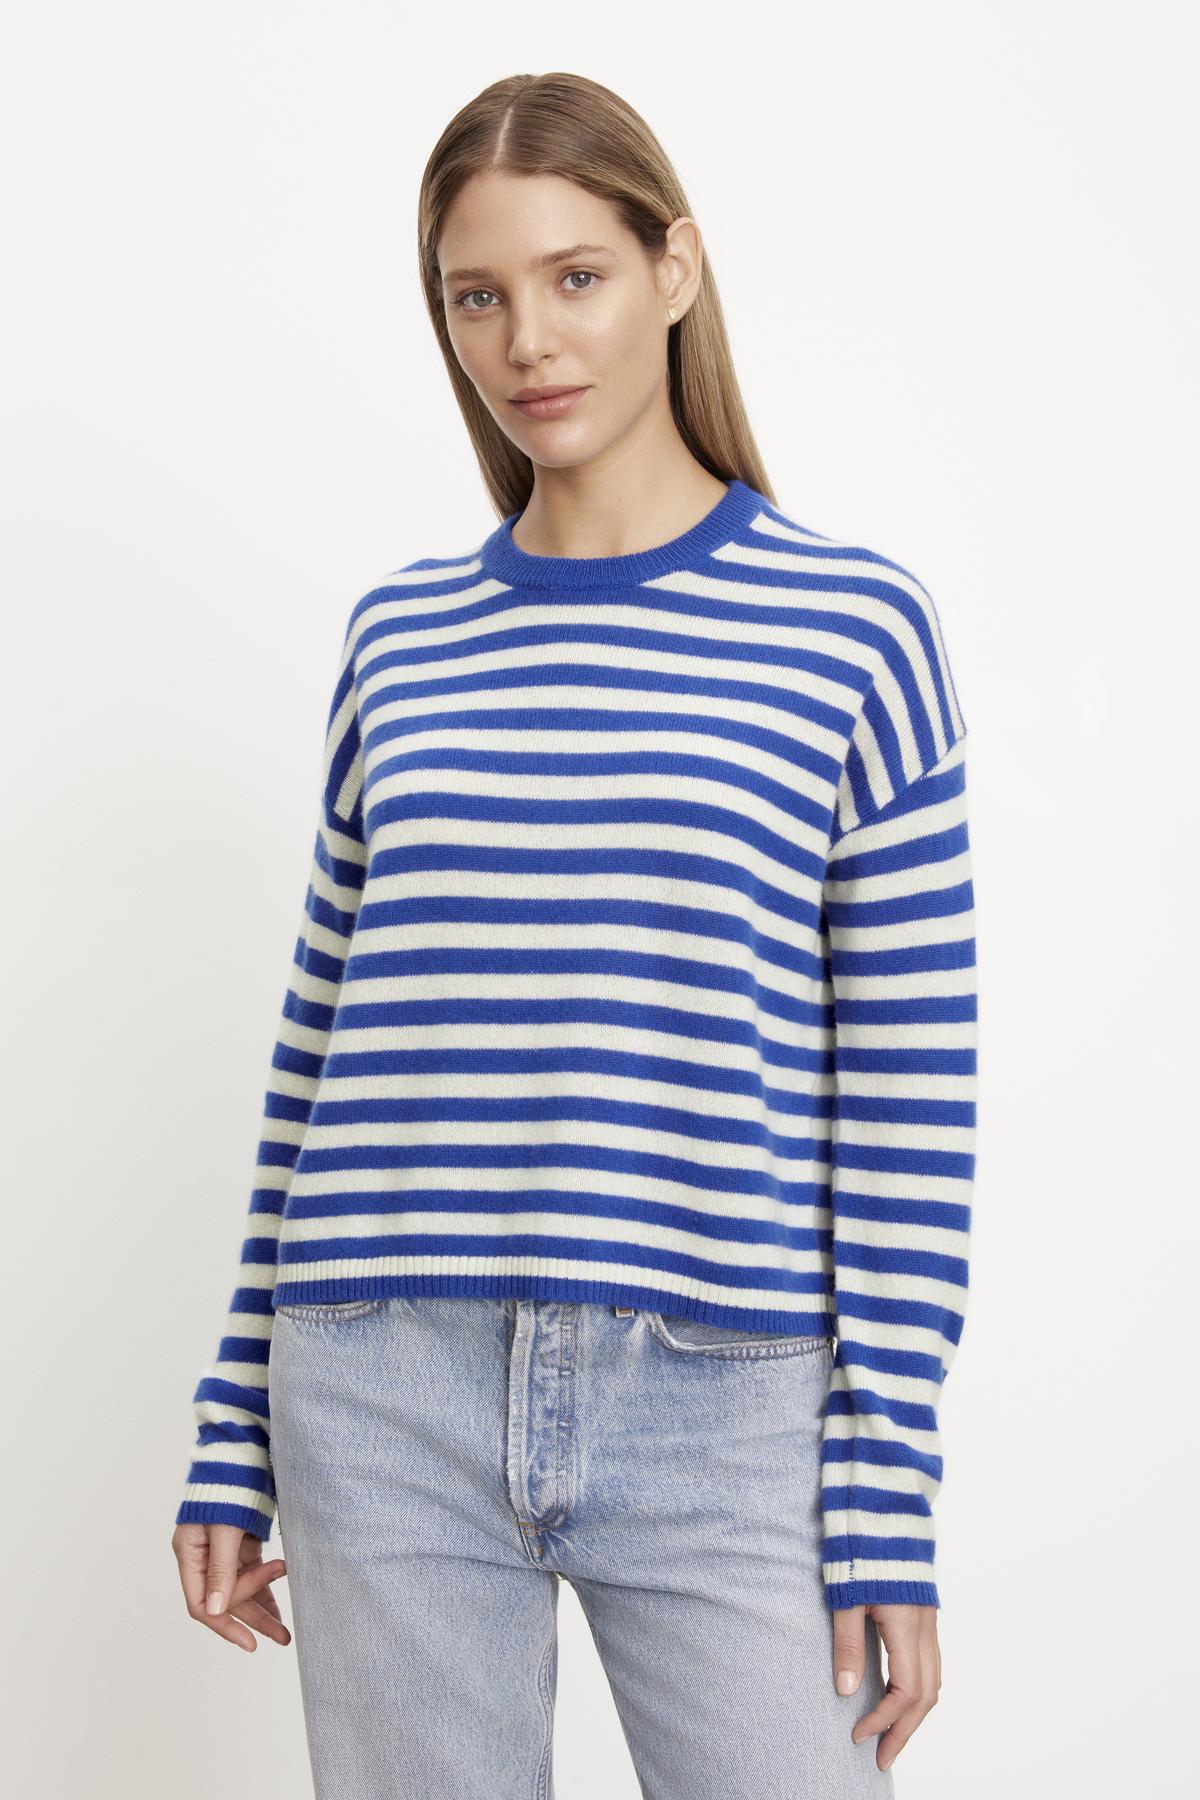   The model is wearing the ALYSSA CASHMERE STRIPED CREW NECK SWEATER from Velvet by Graham & Spencer. 